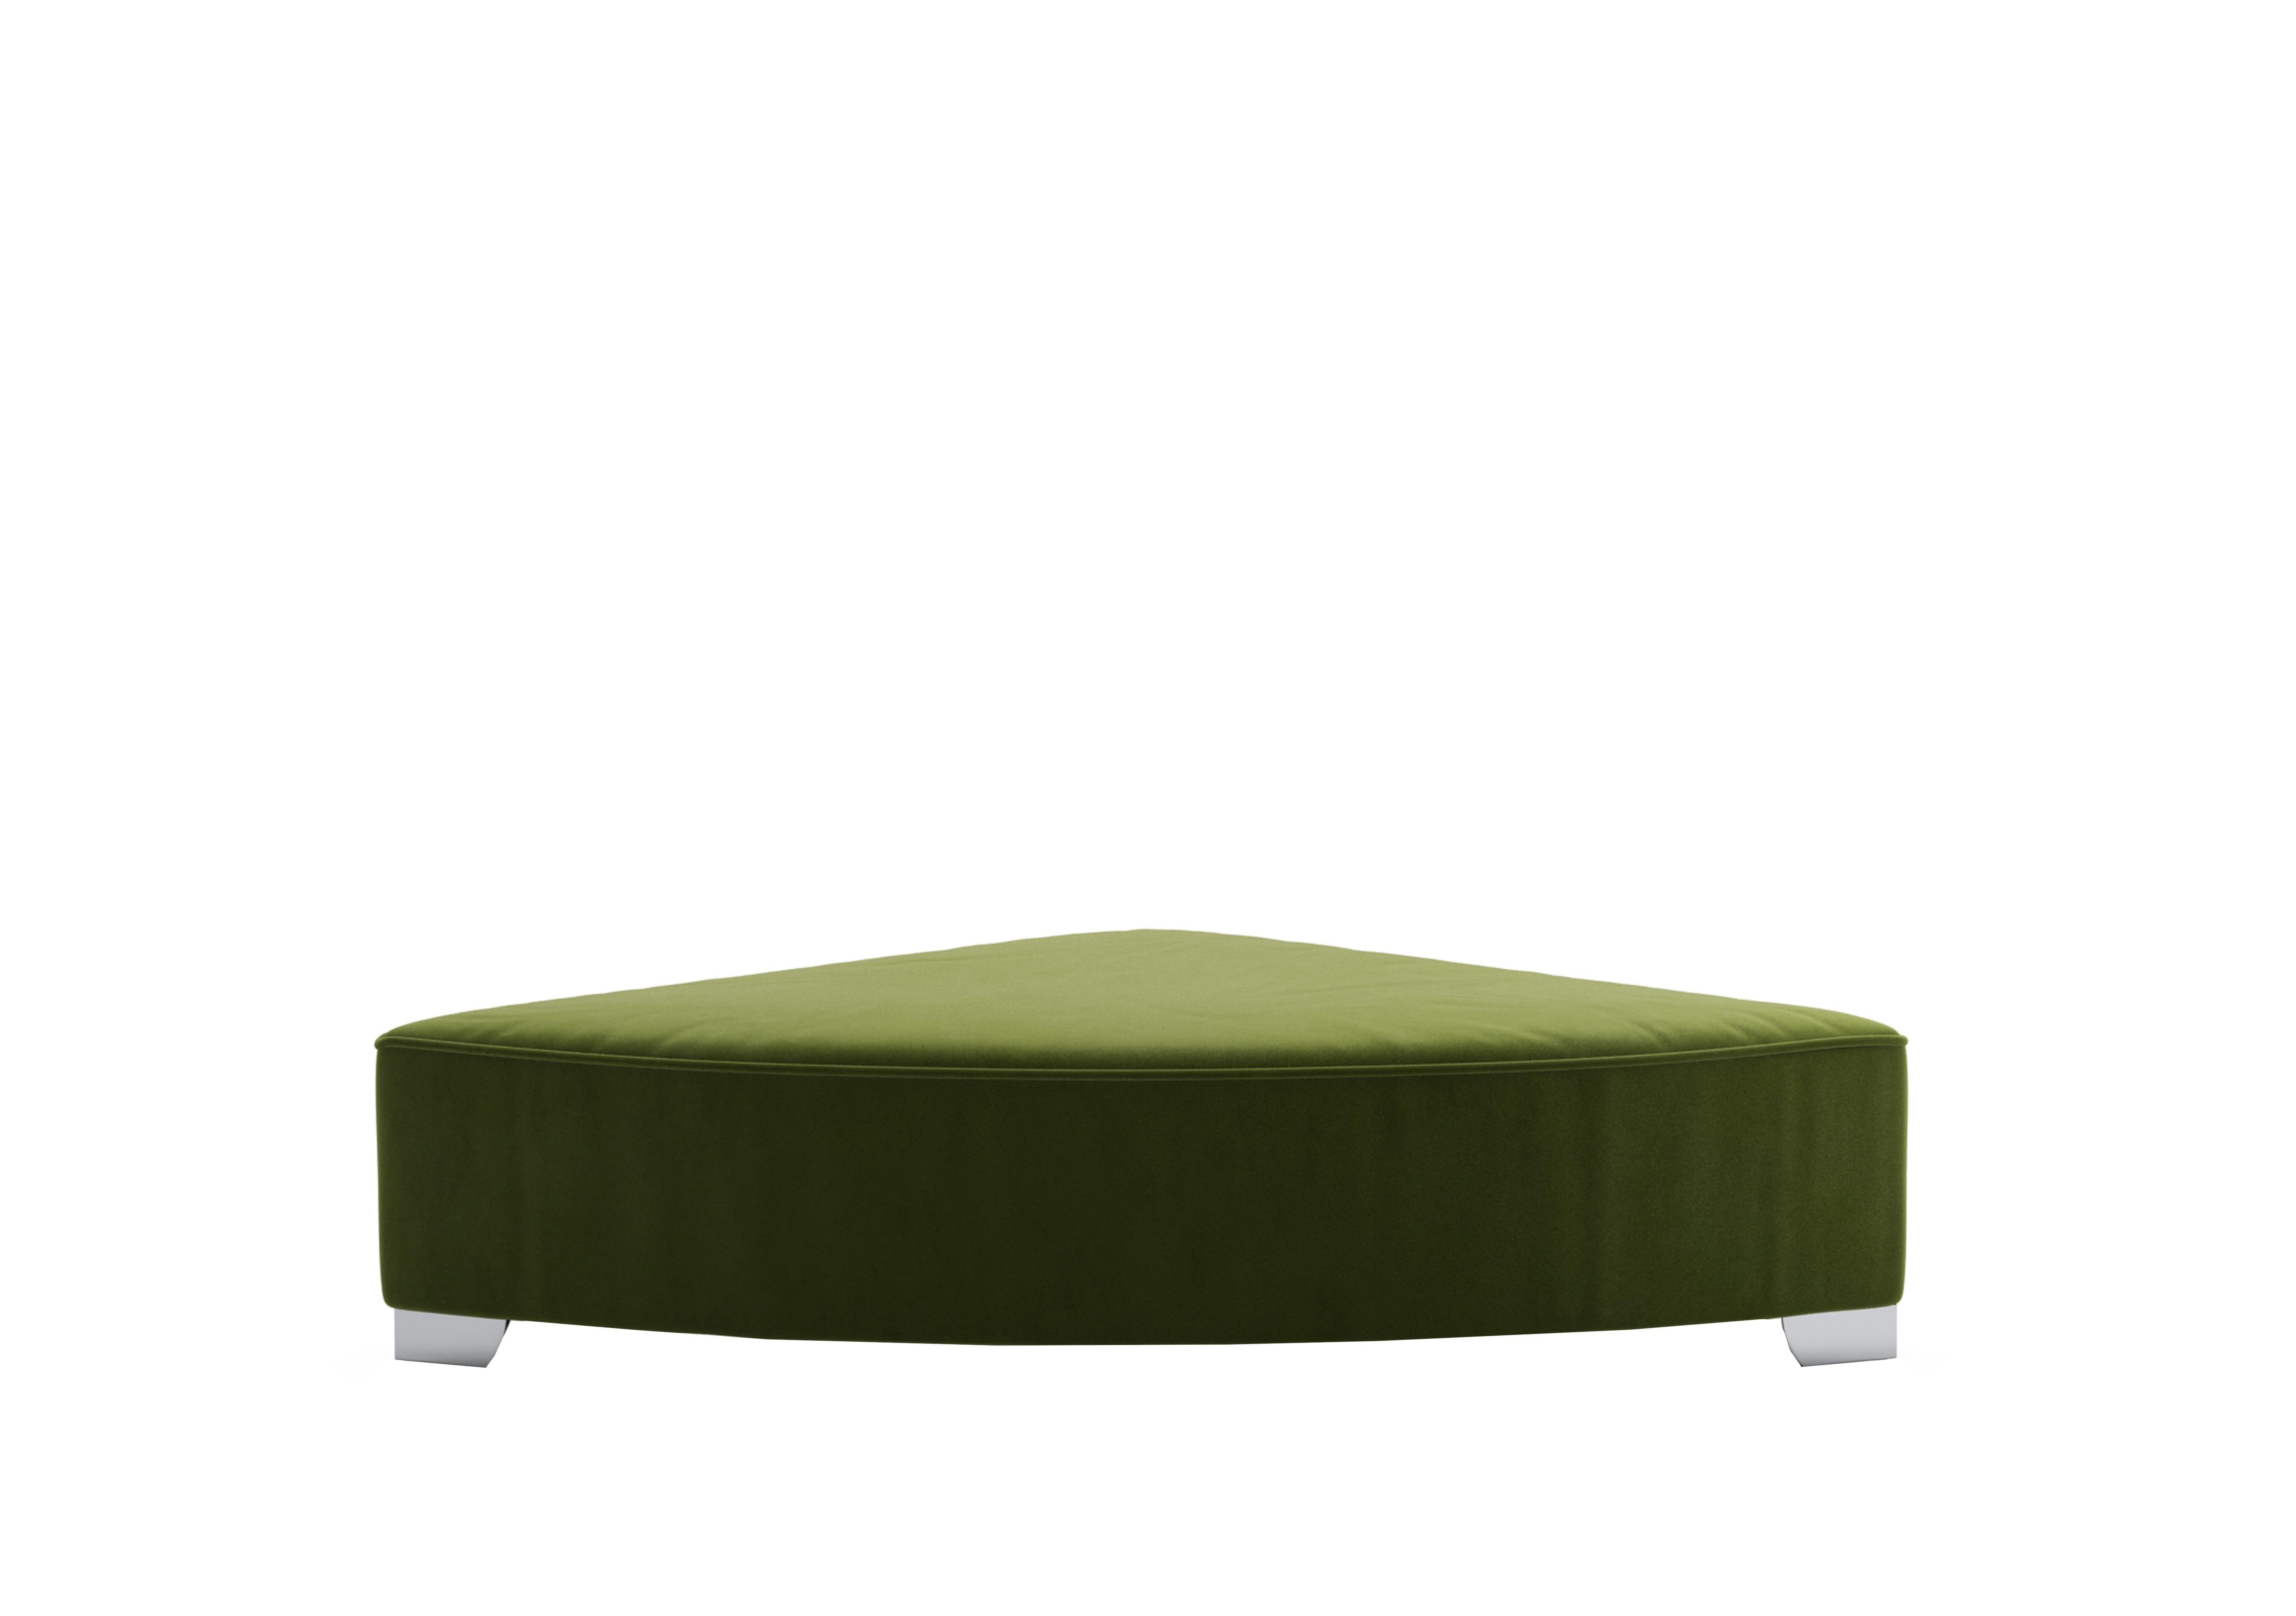 Isobel Fabric Wedge Footstool in Woo160 Woodland Moss Ch Ft on Furniture Village